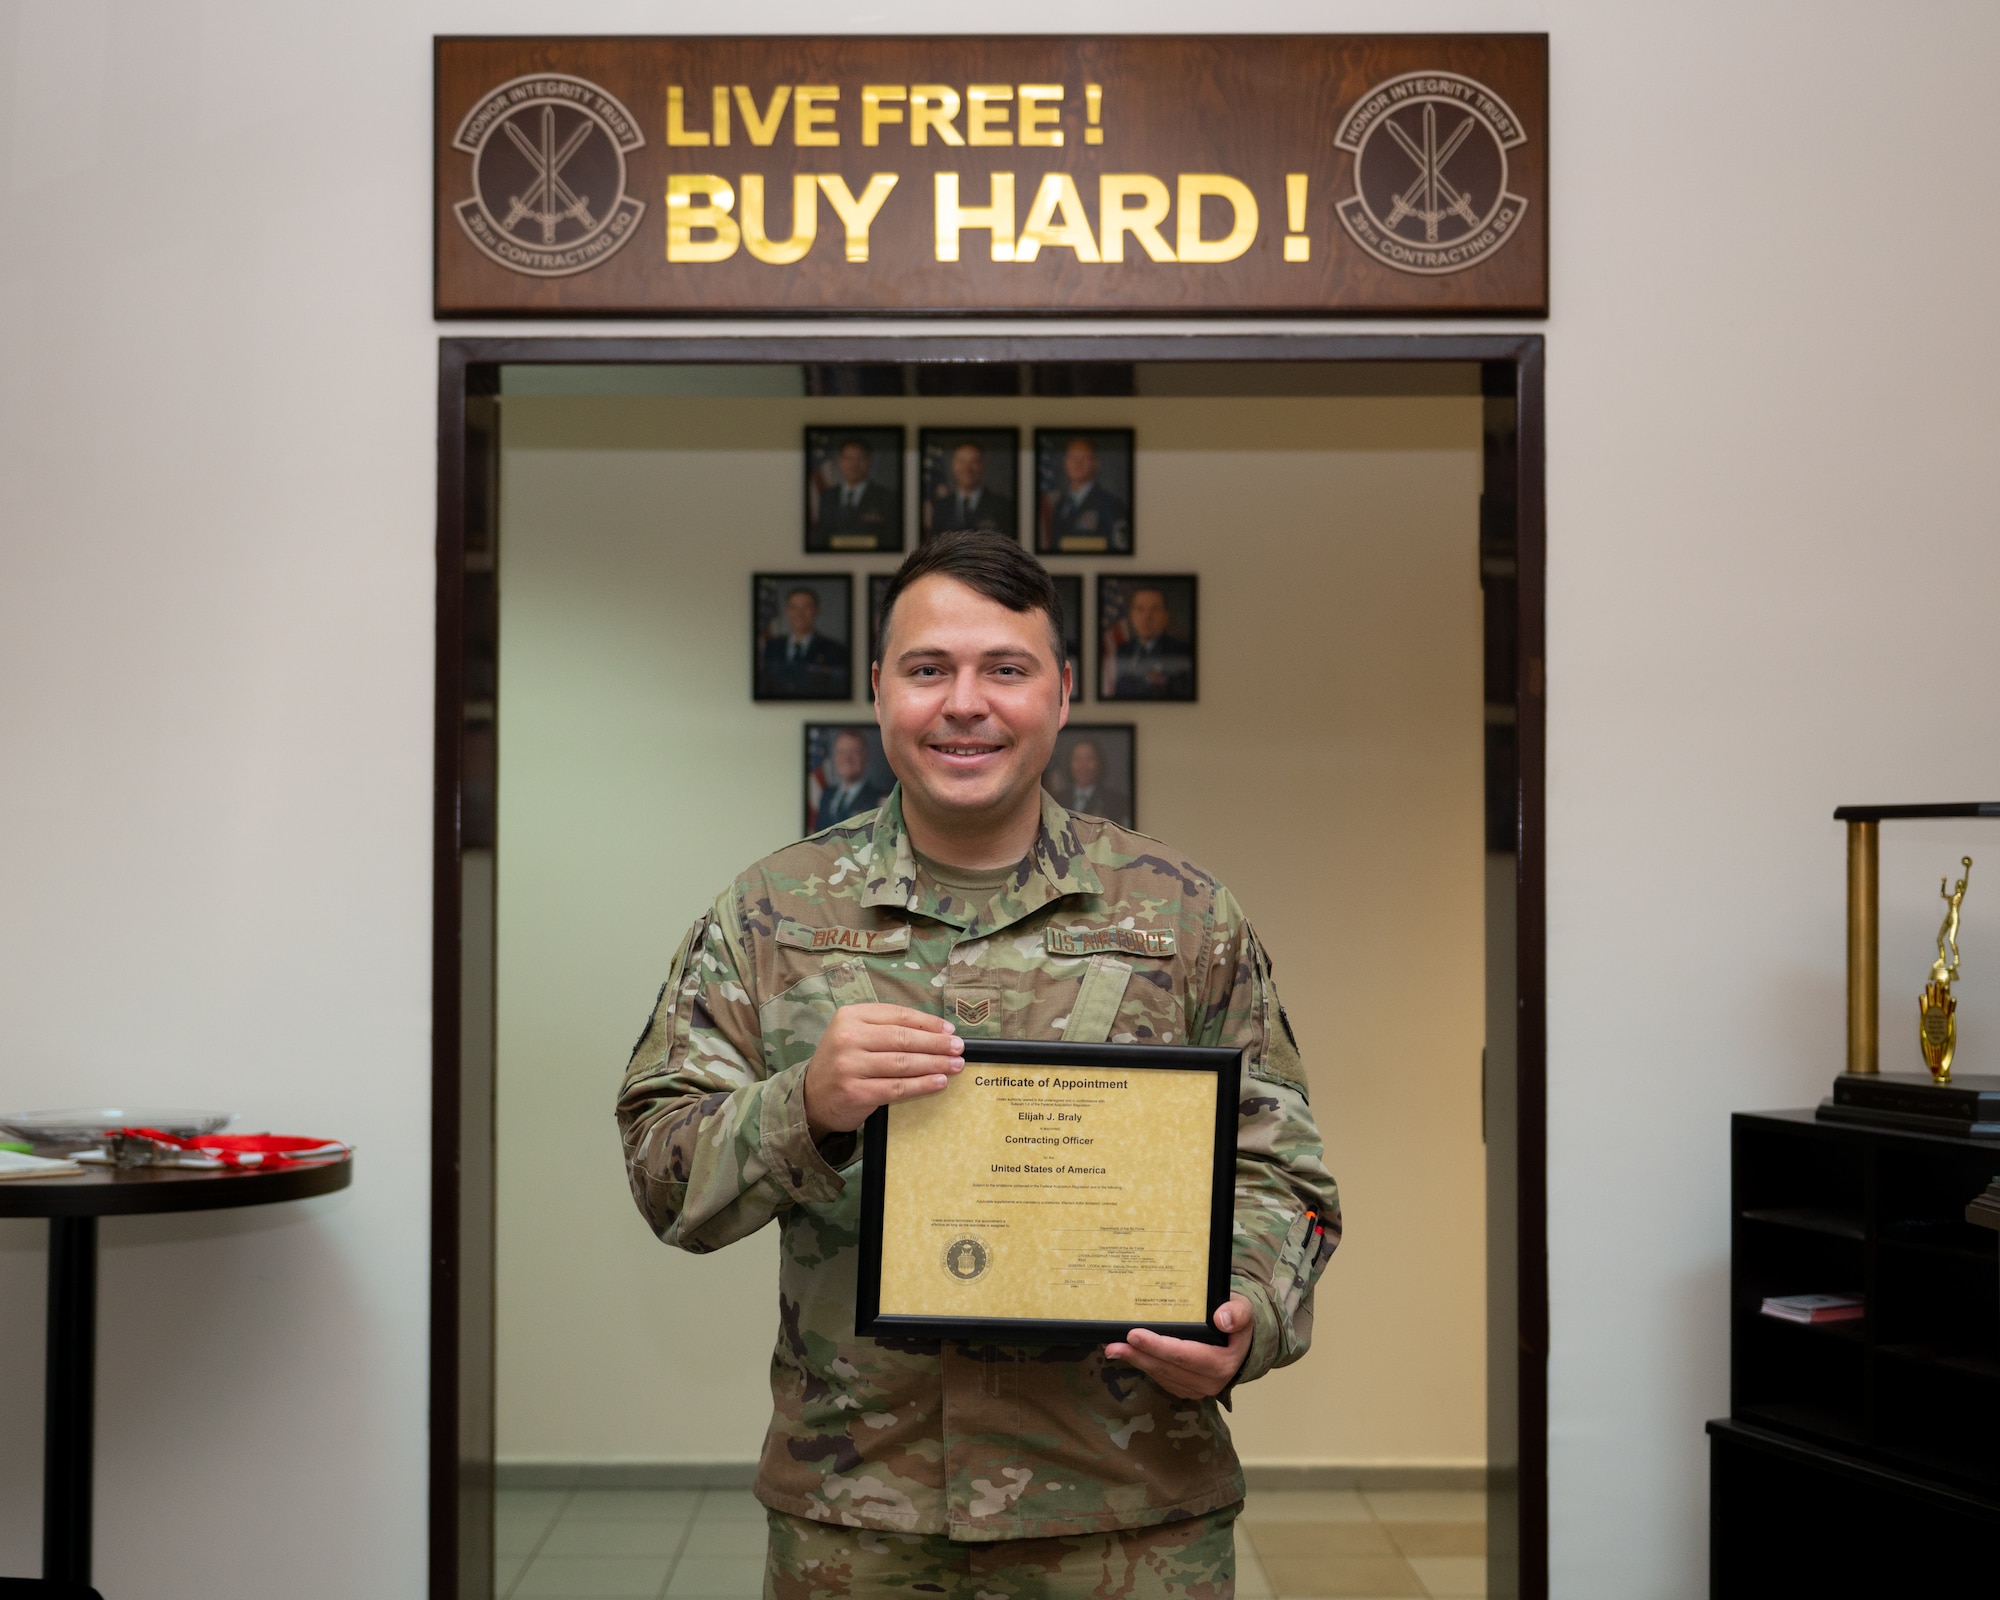 An Airman poses with certificate.